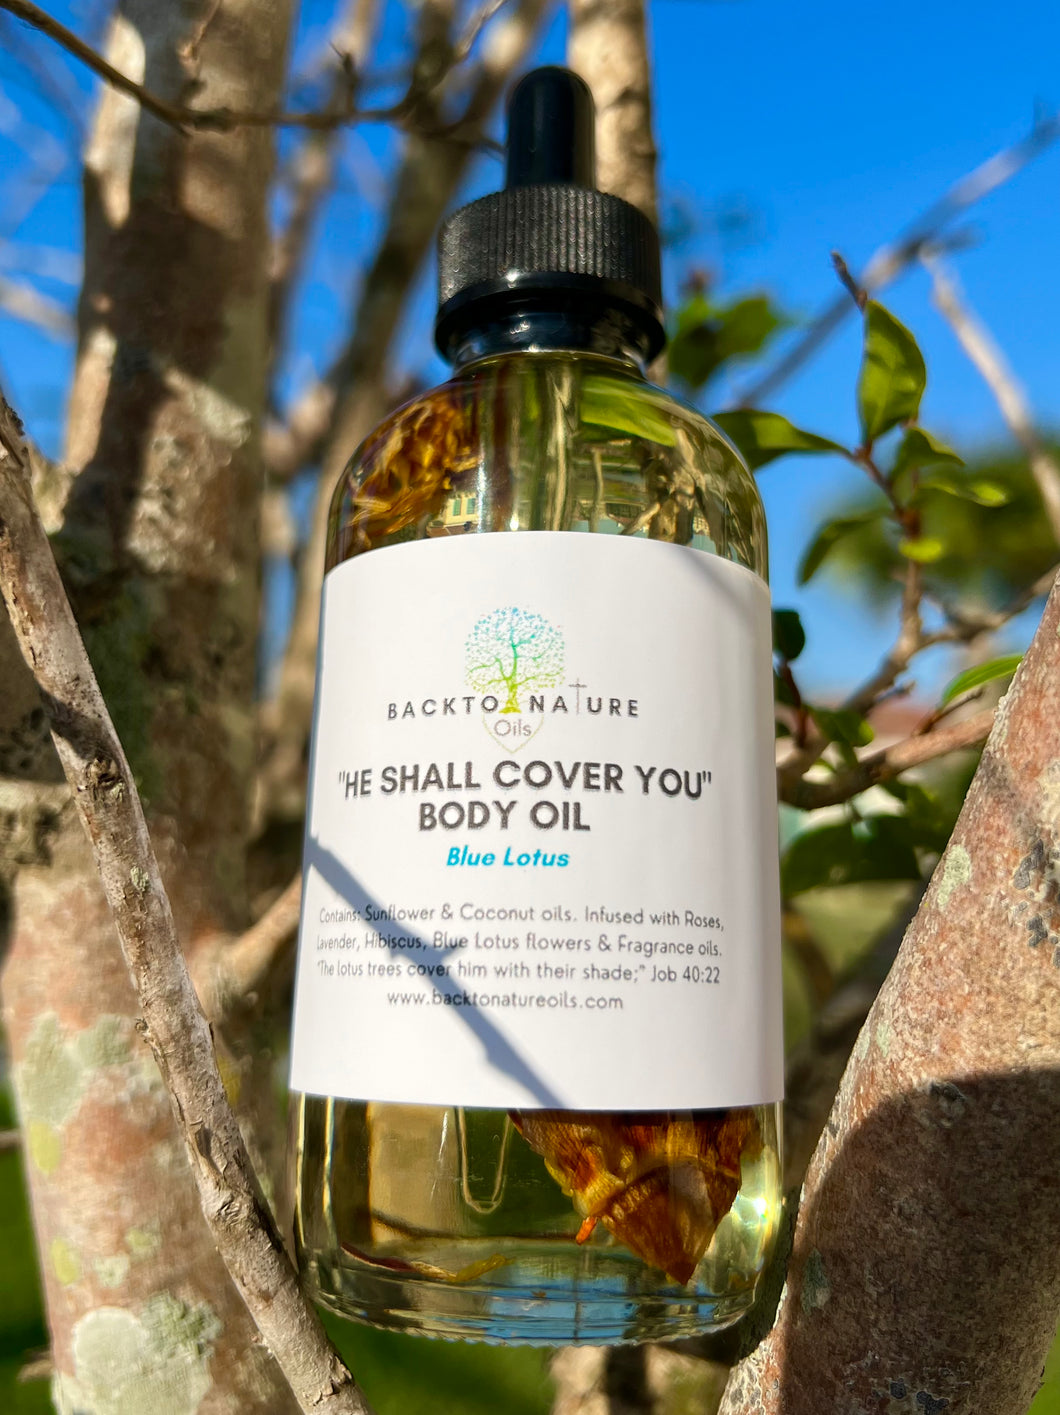 “He Shall Cover You” Body Oil 𝐵𝑙𝑢𝑒 𝐿𝑜𝑡𝑢𝑠